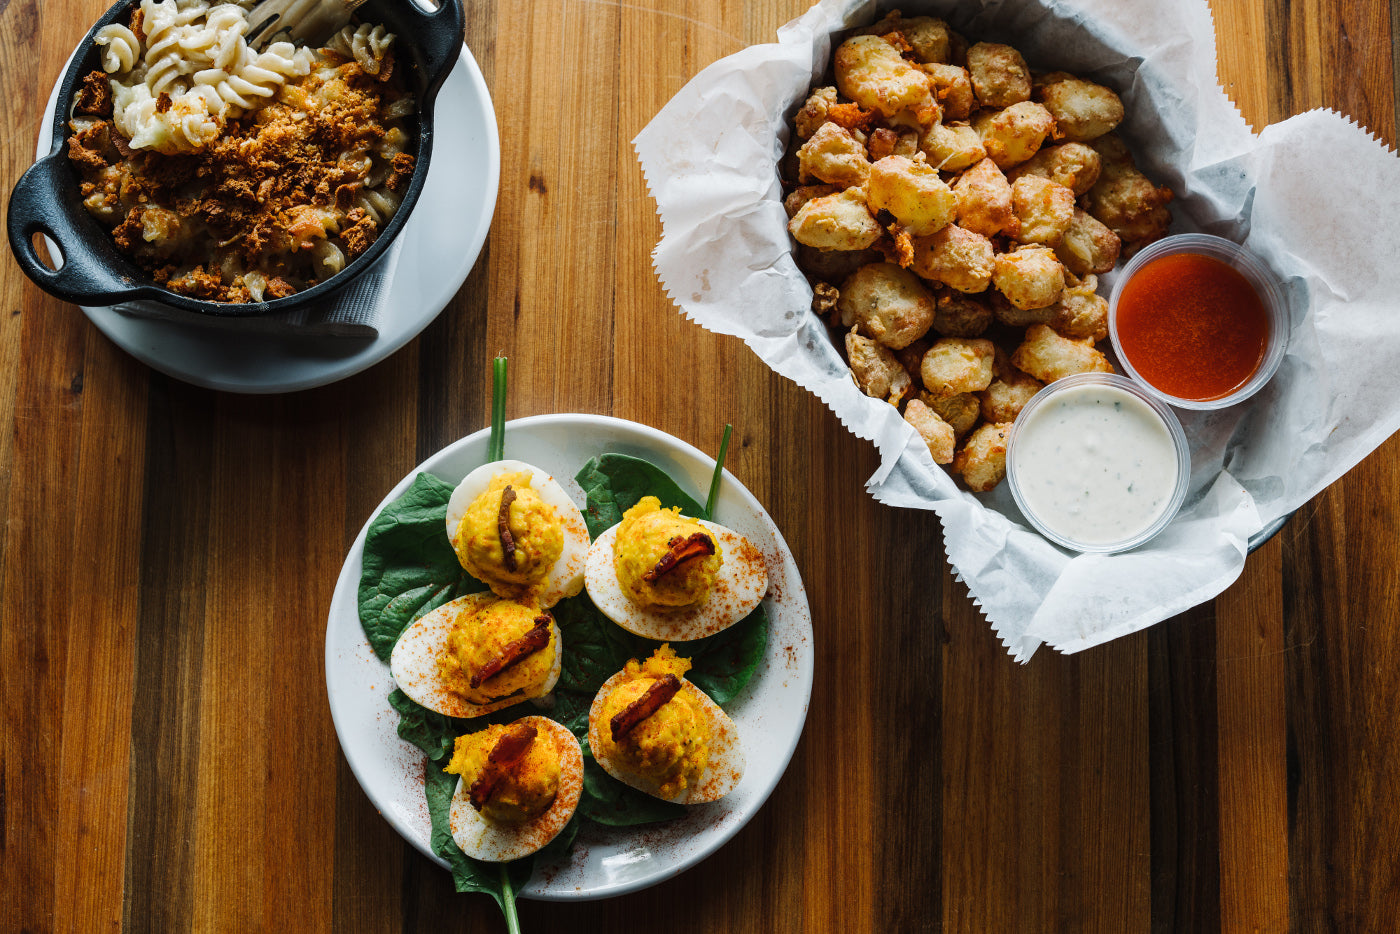 Mac & Cheese, Deviled Eggs, and Cheese Curds sitting on a table